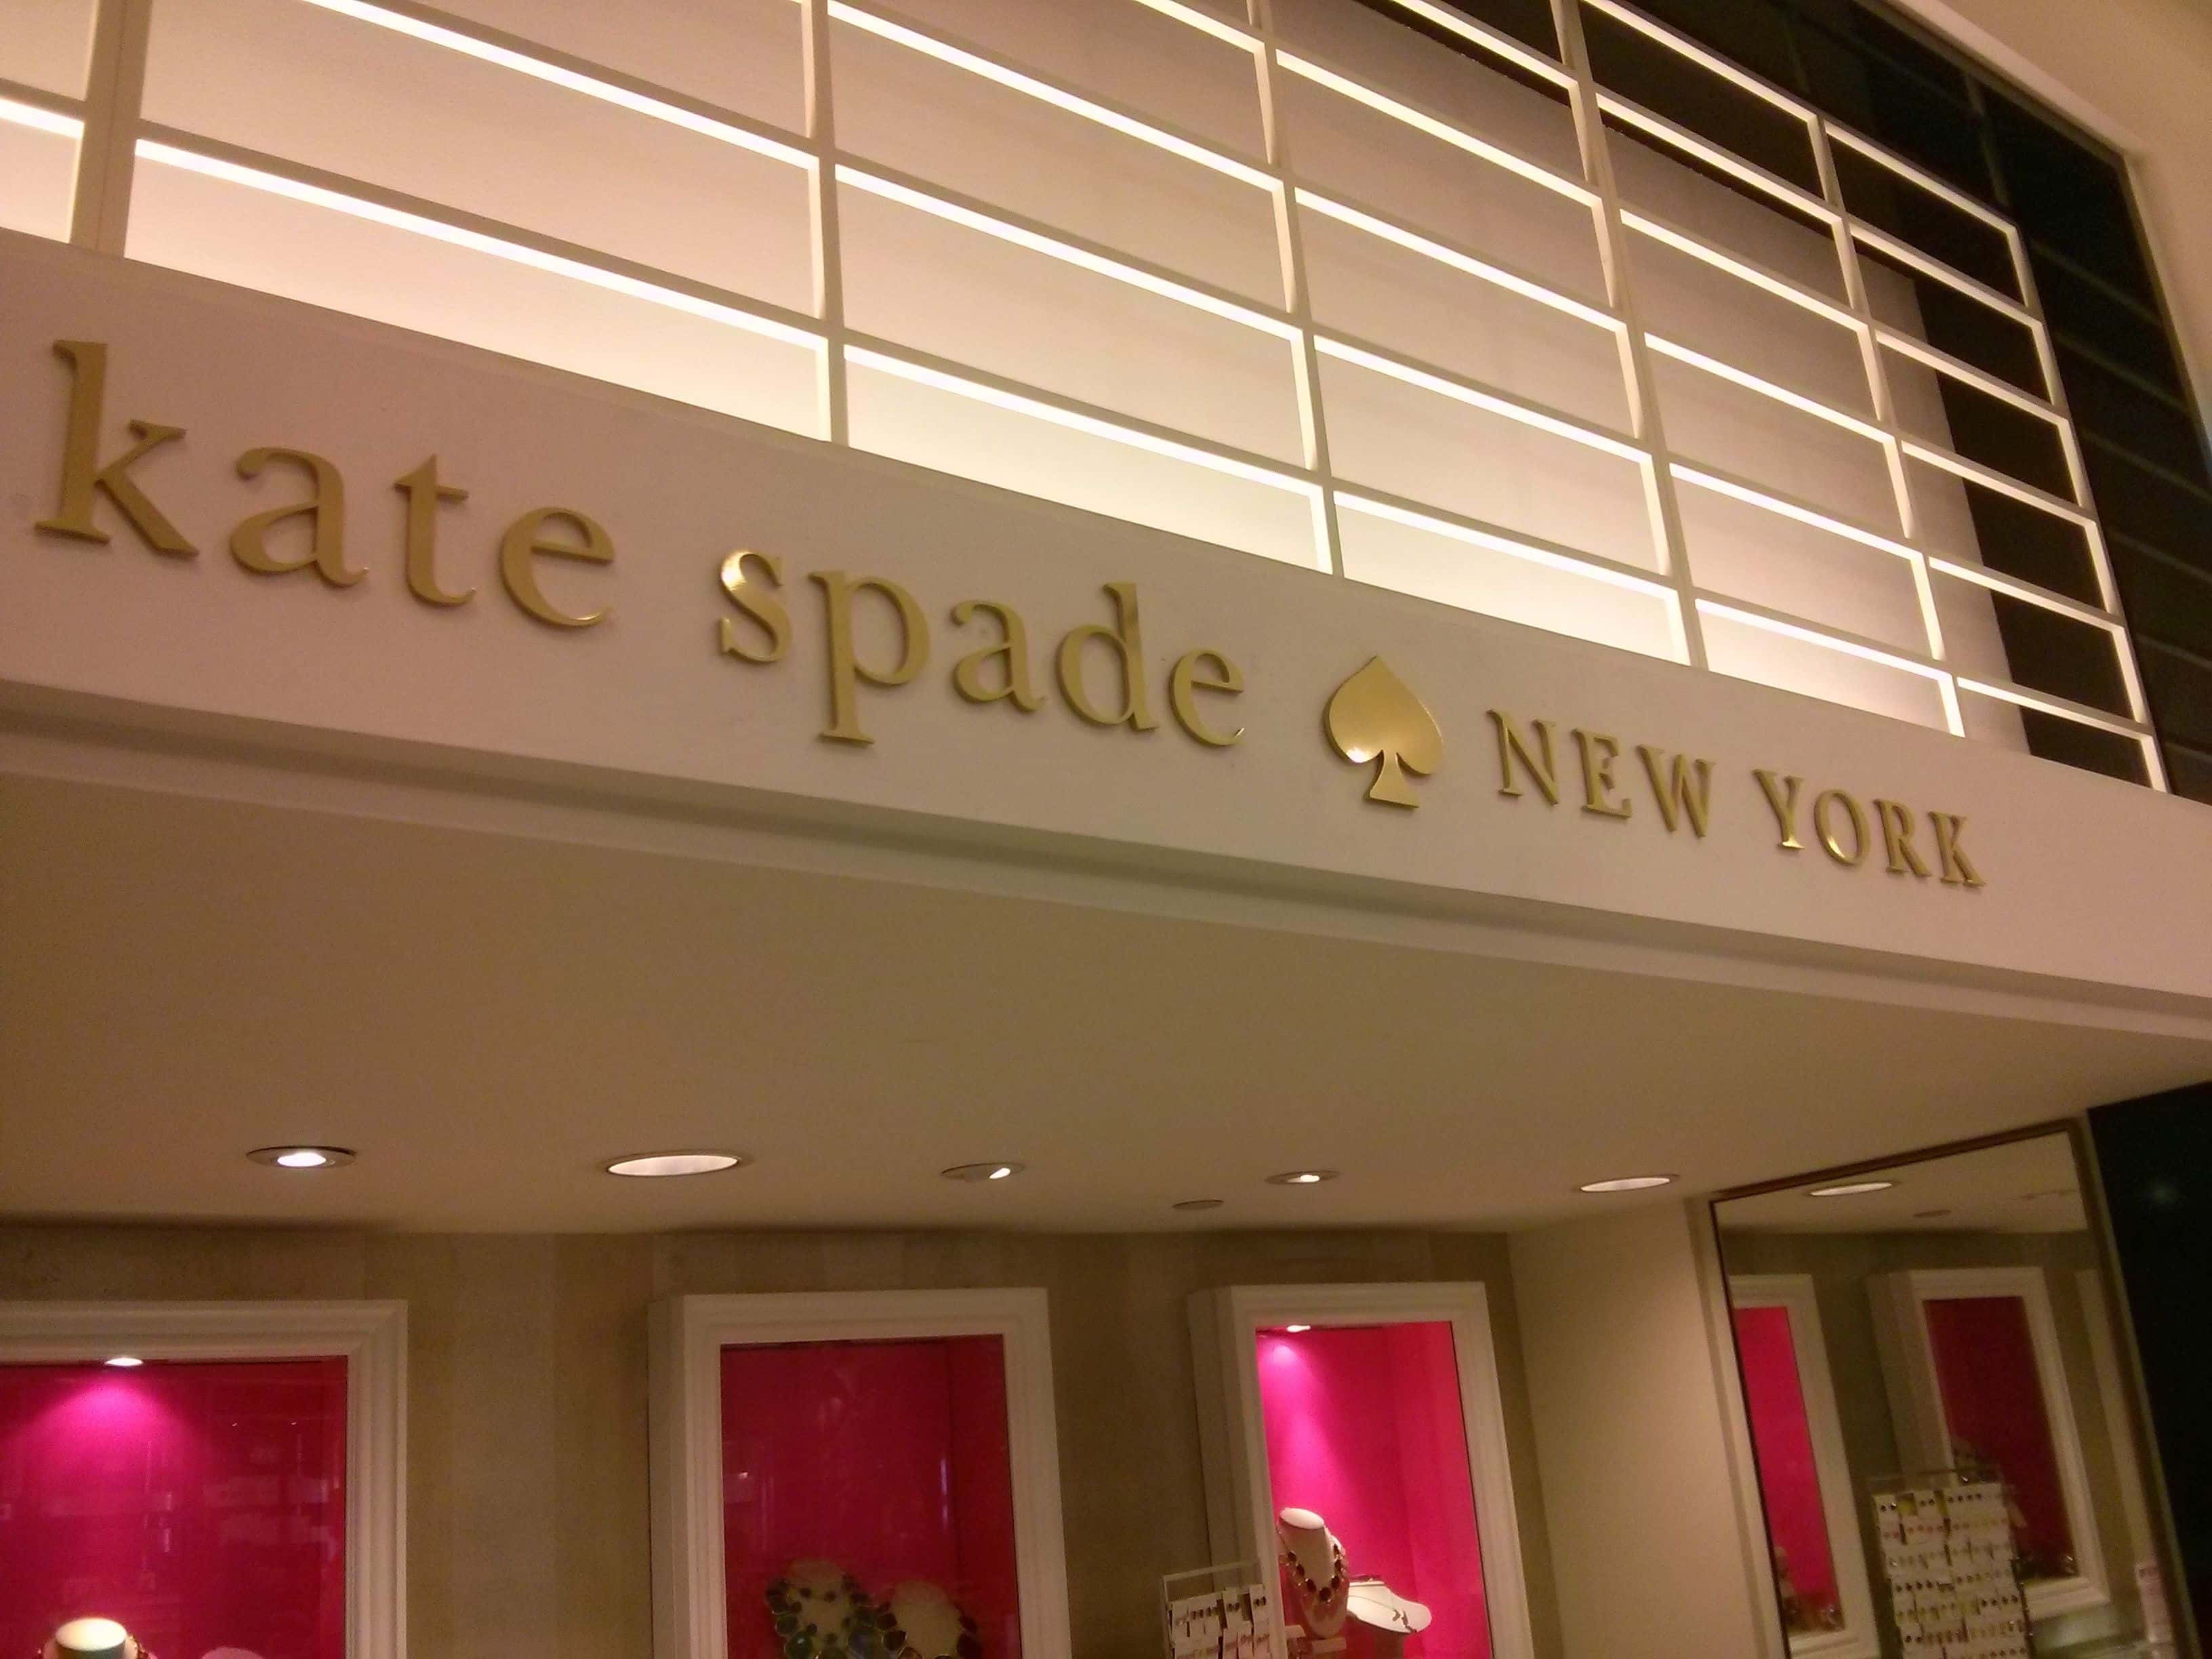 Kate Spade facts 